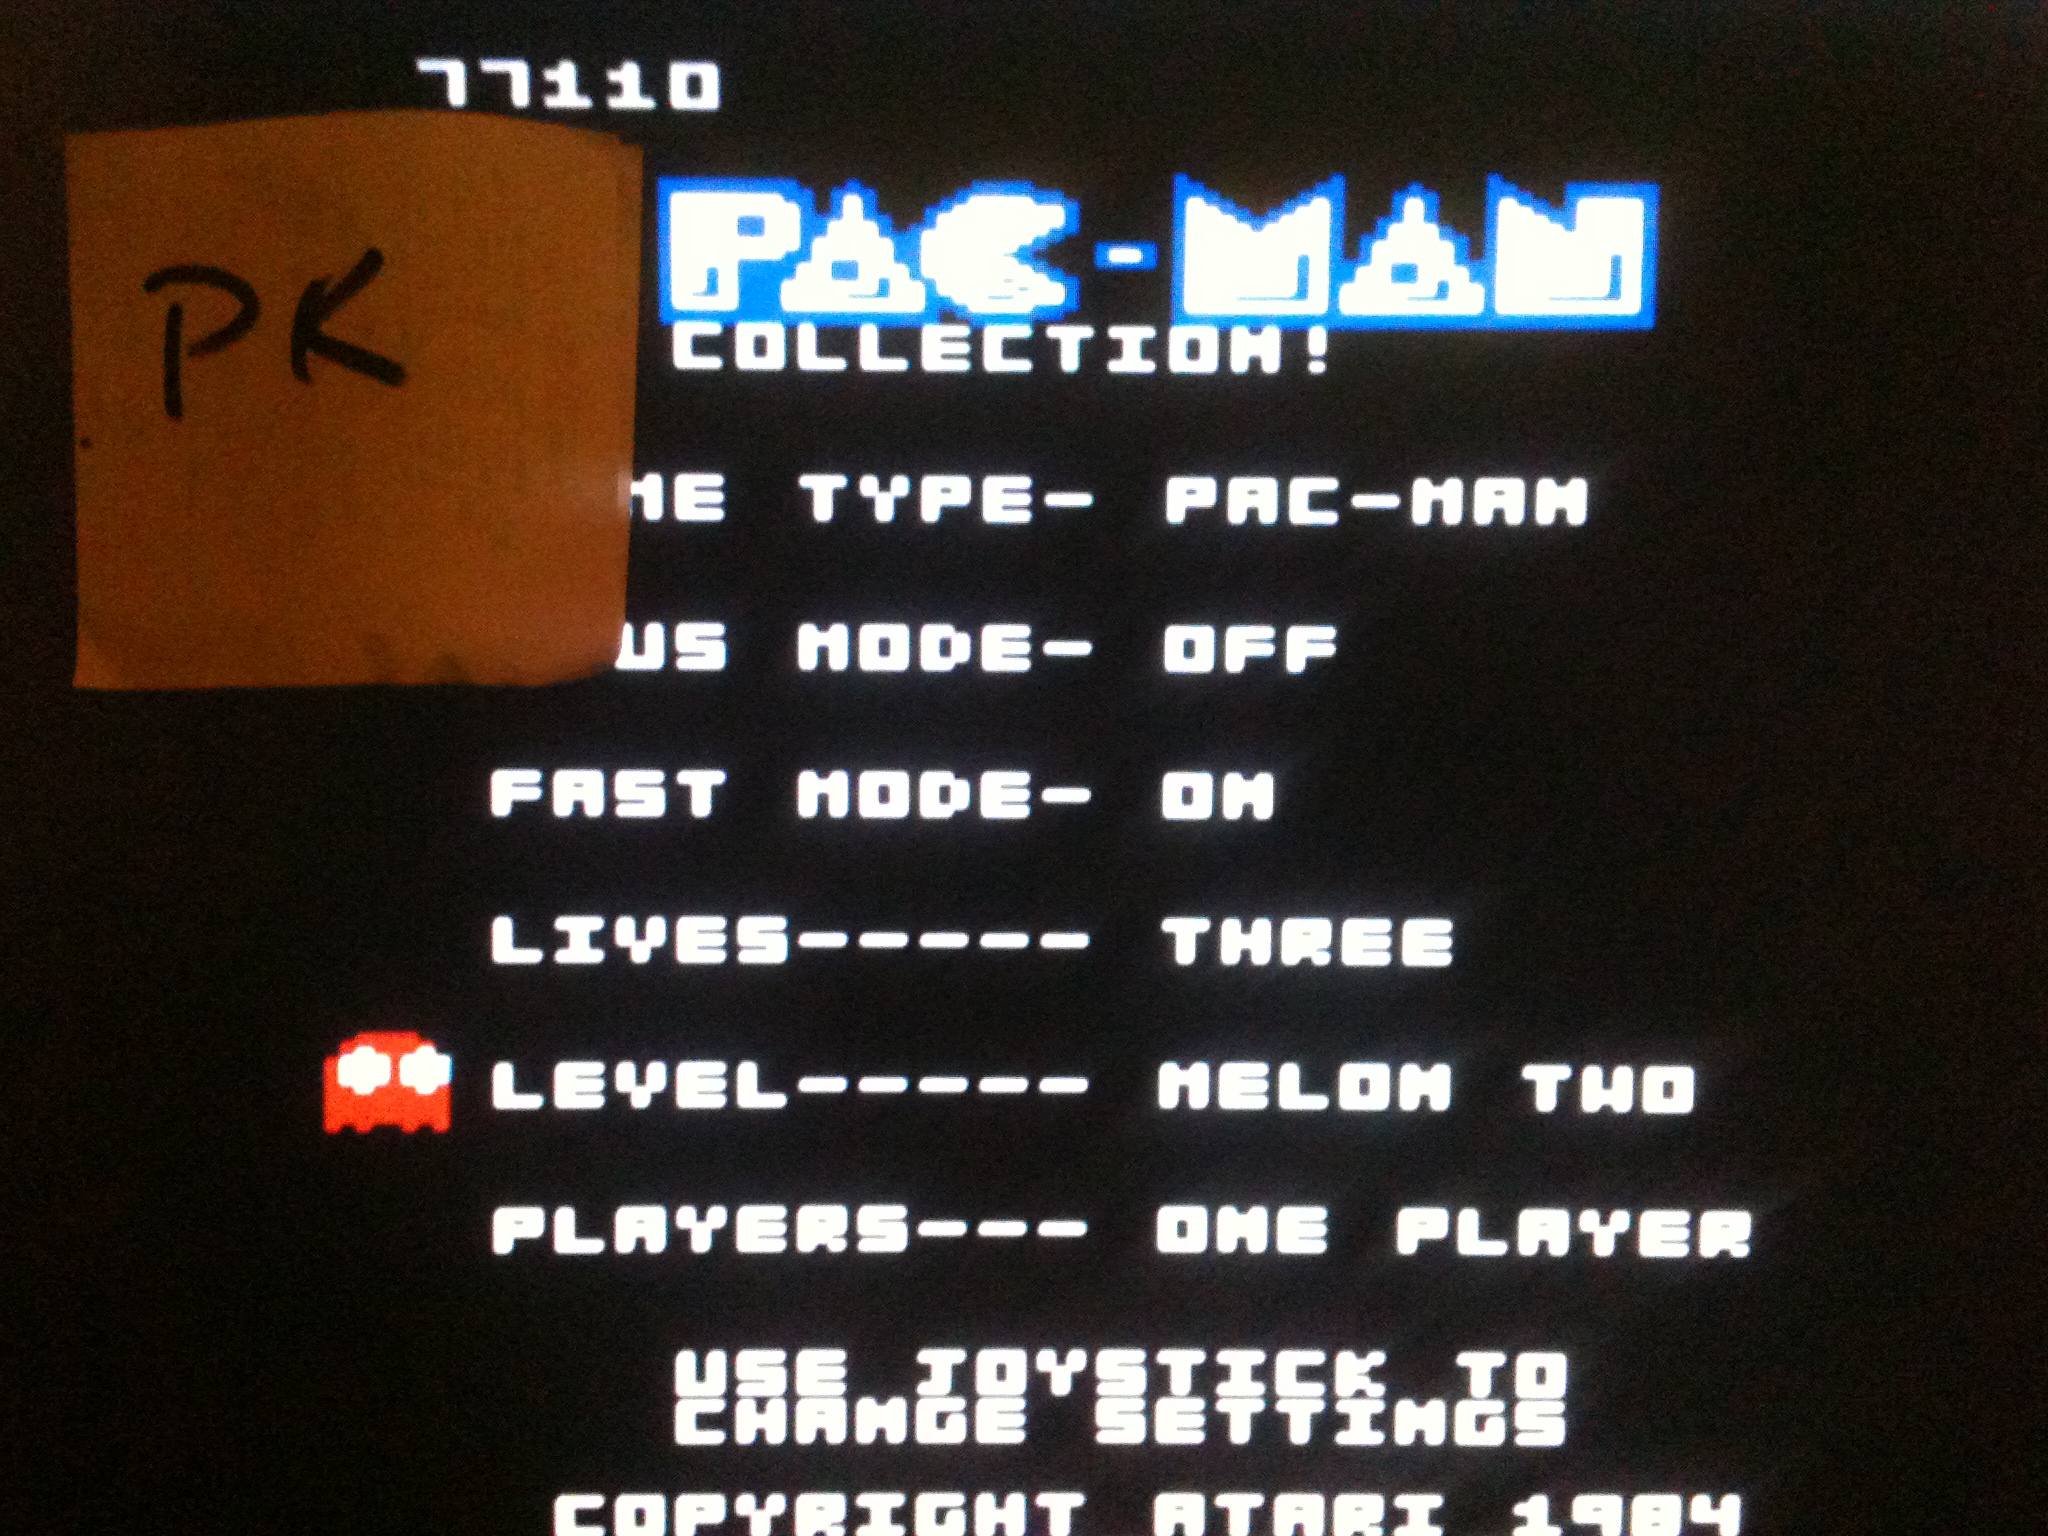 kernzy: Pac-Man Collection: Pac-Man [Melon Two/Plus Off/Fast On] (Atari 7800 Emulated) 77,110 points on 2015-09-16 17:02:49